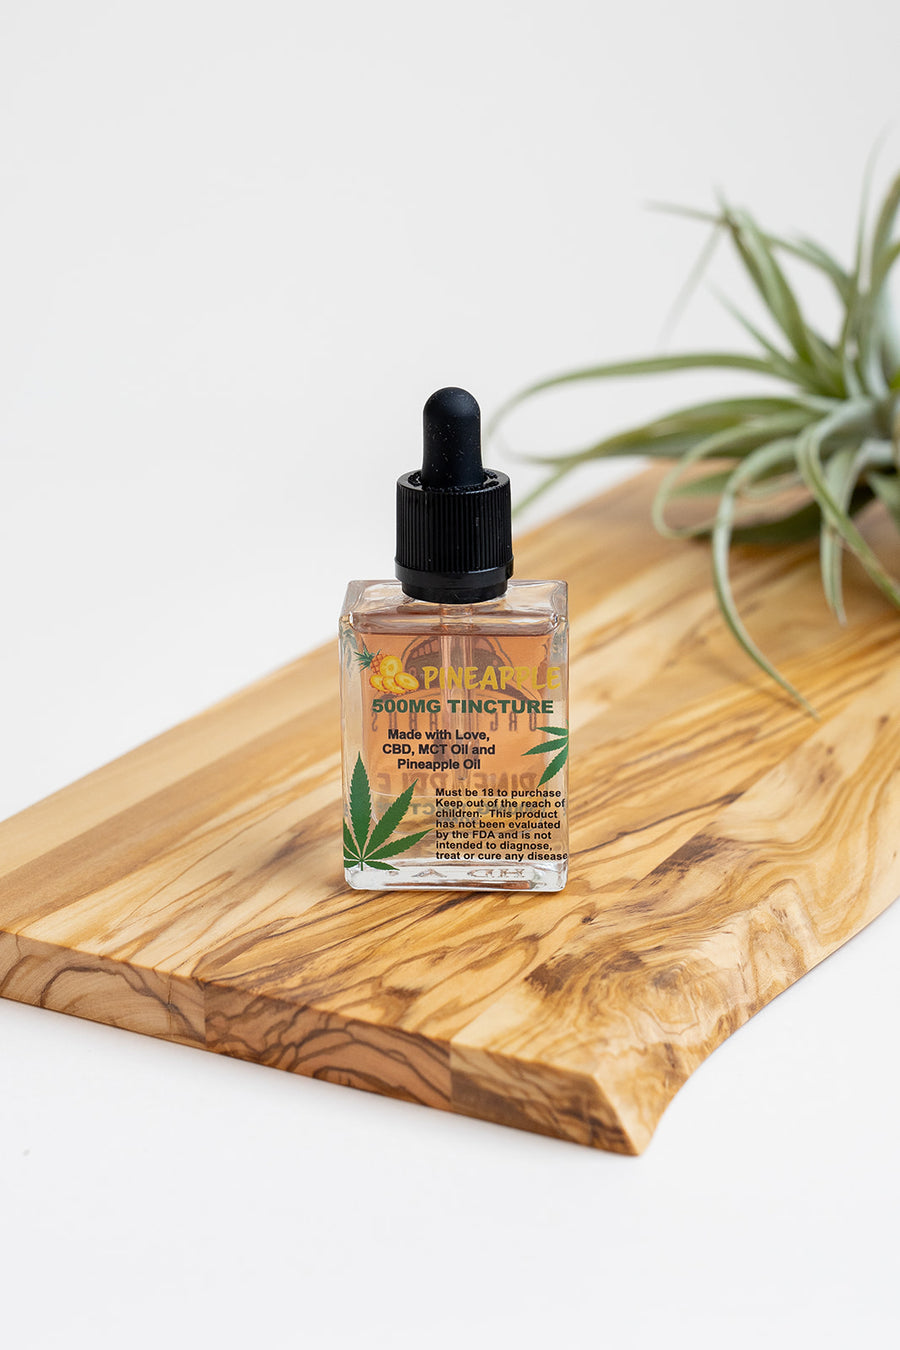 THC free tinctures made with 99.9% pure CBD isolate